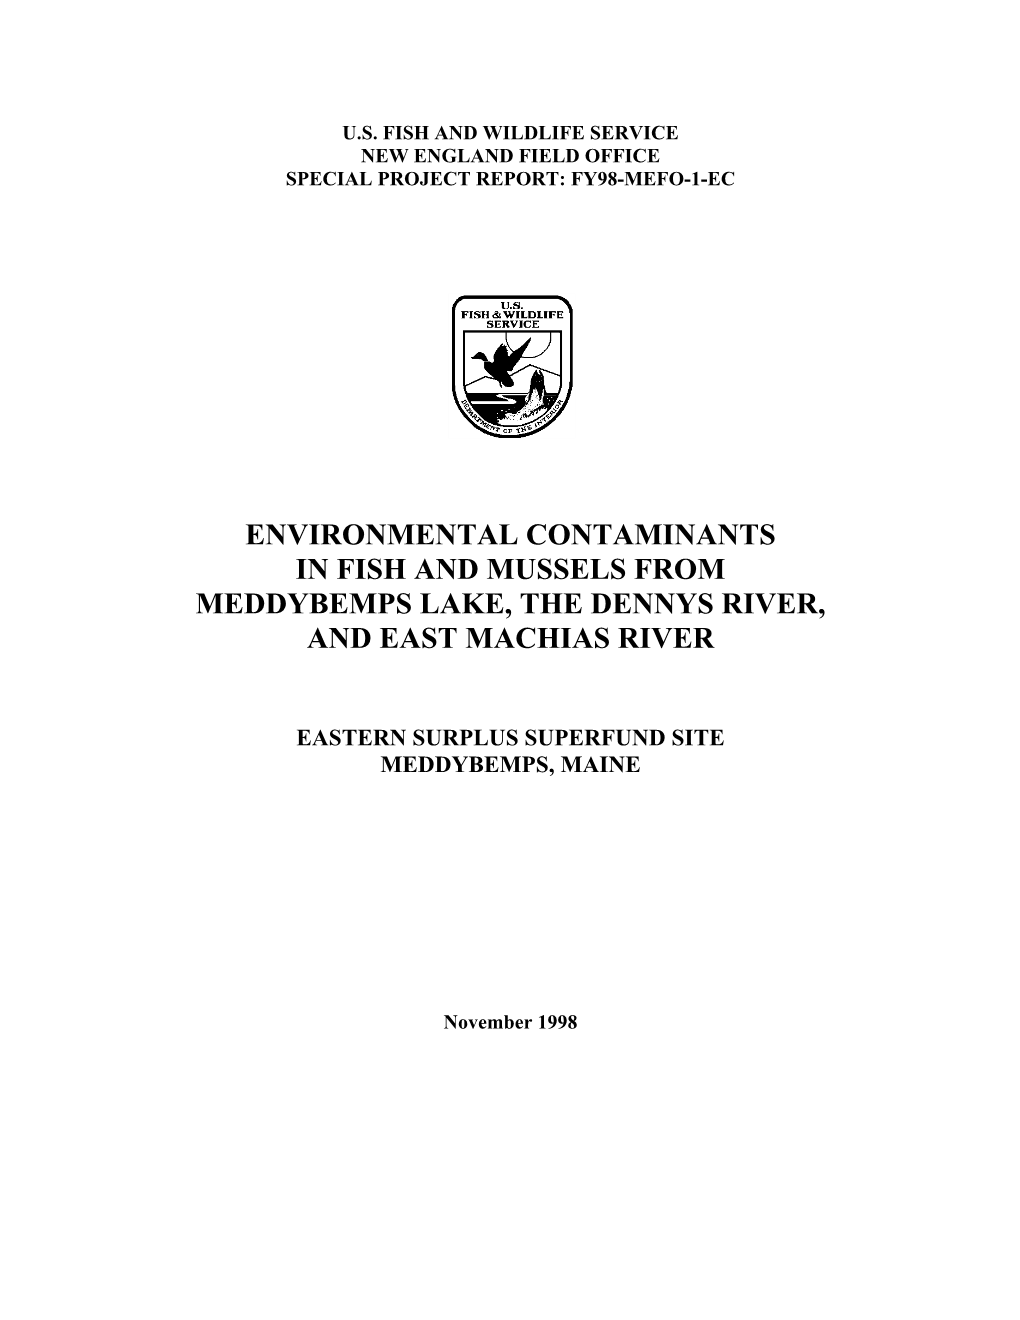 Environmental Contaminants in Fish and Mussels from Meddybemps Lake, the Dennys River, and East Machias River